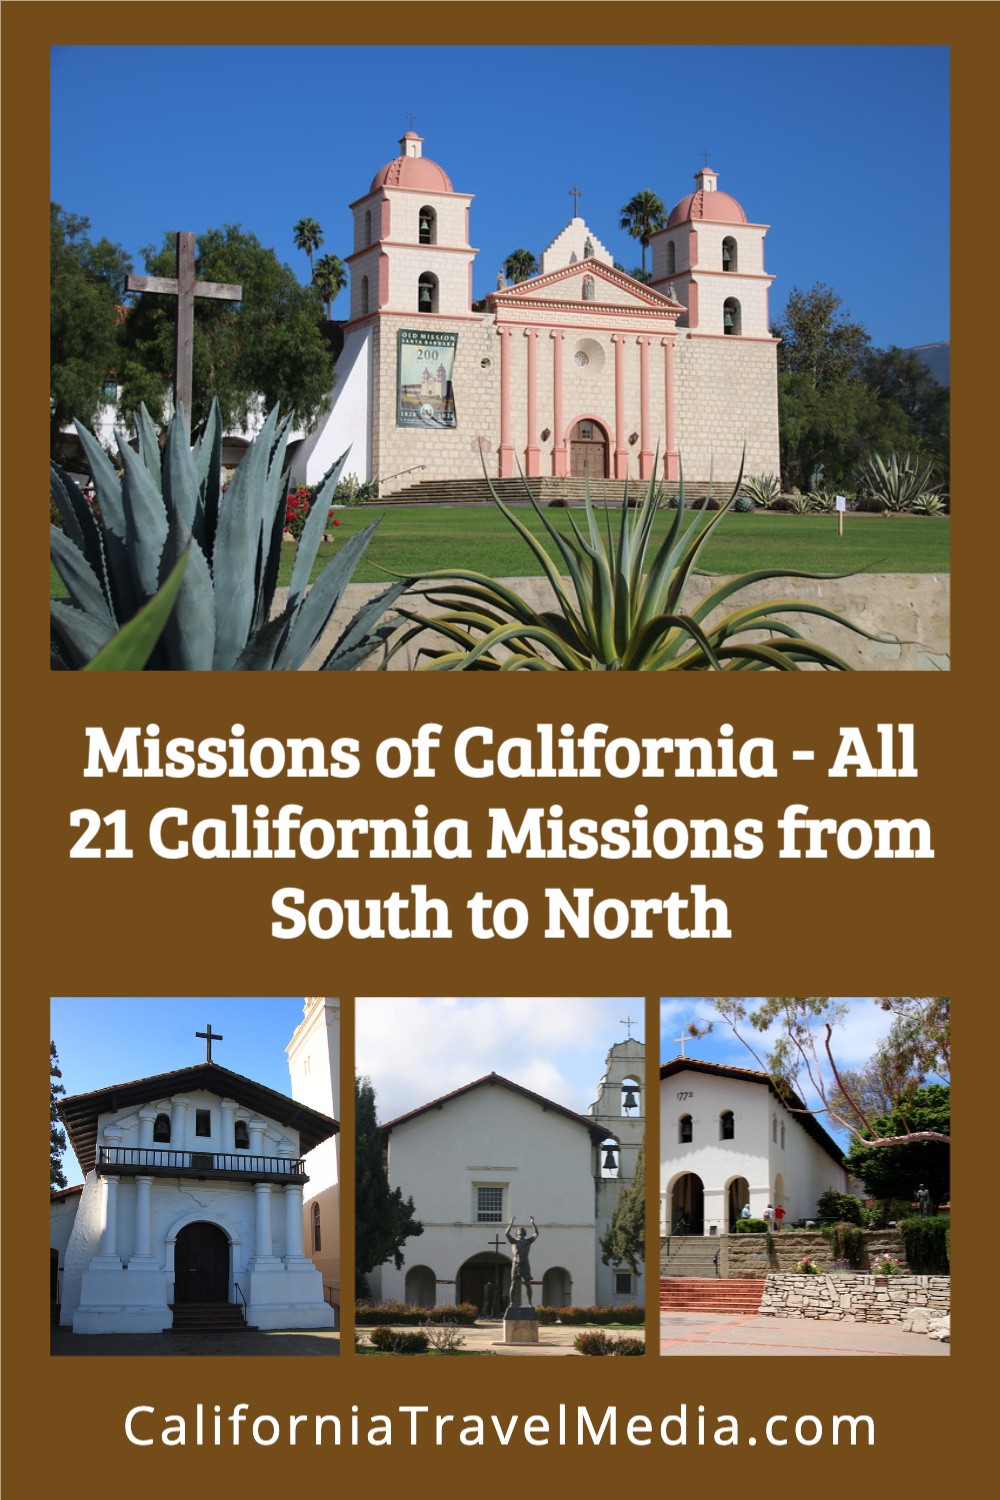 Missions of California with Map - All 21 California Missions from South to North #california #missions #history #spanish #father-serra #places #map